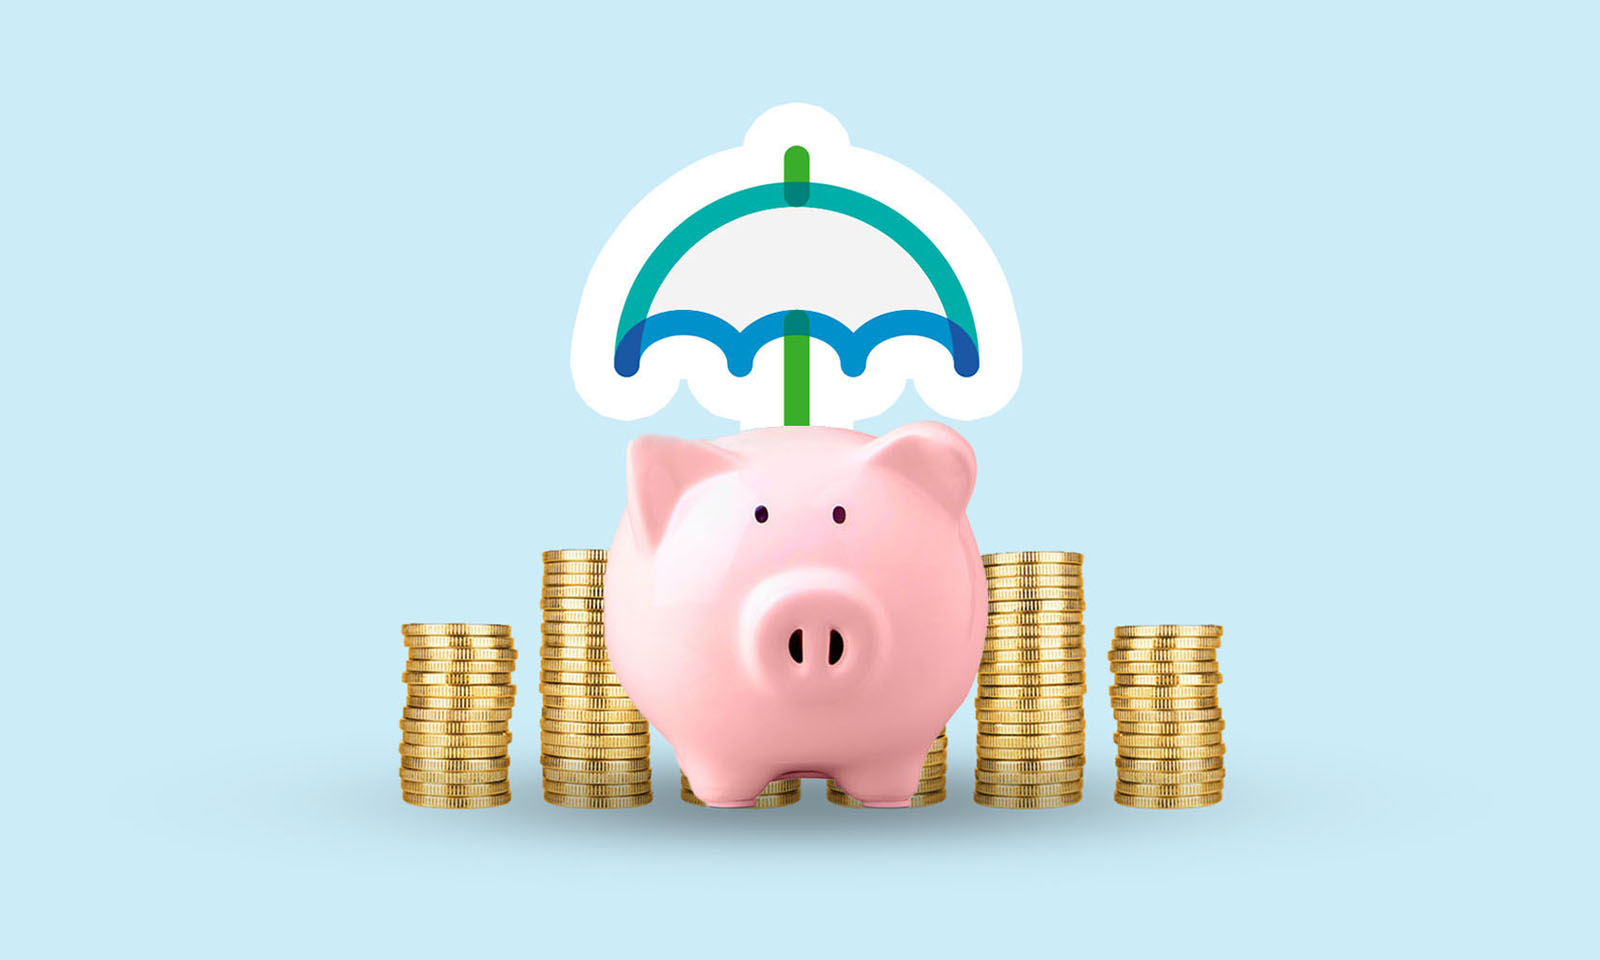 A piggy bank surrounded by coins sits under an umbrella